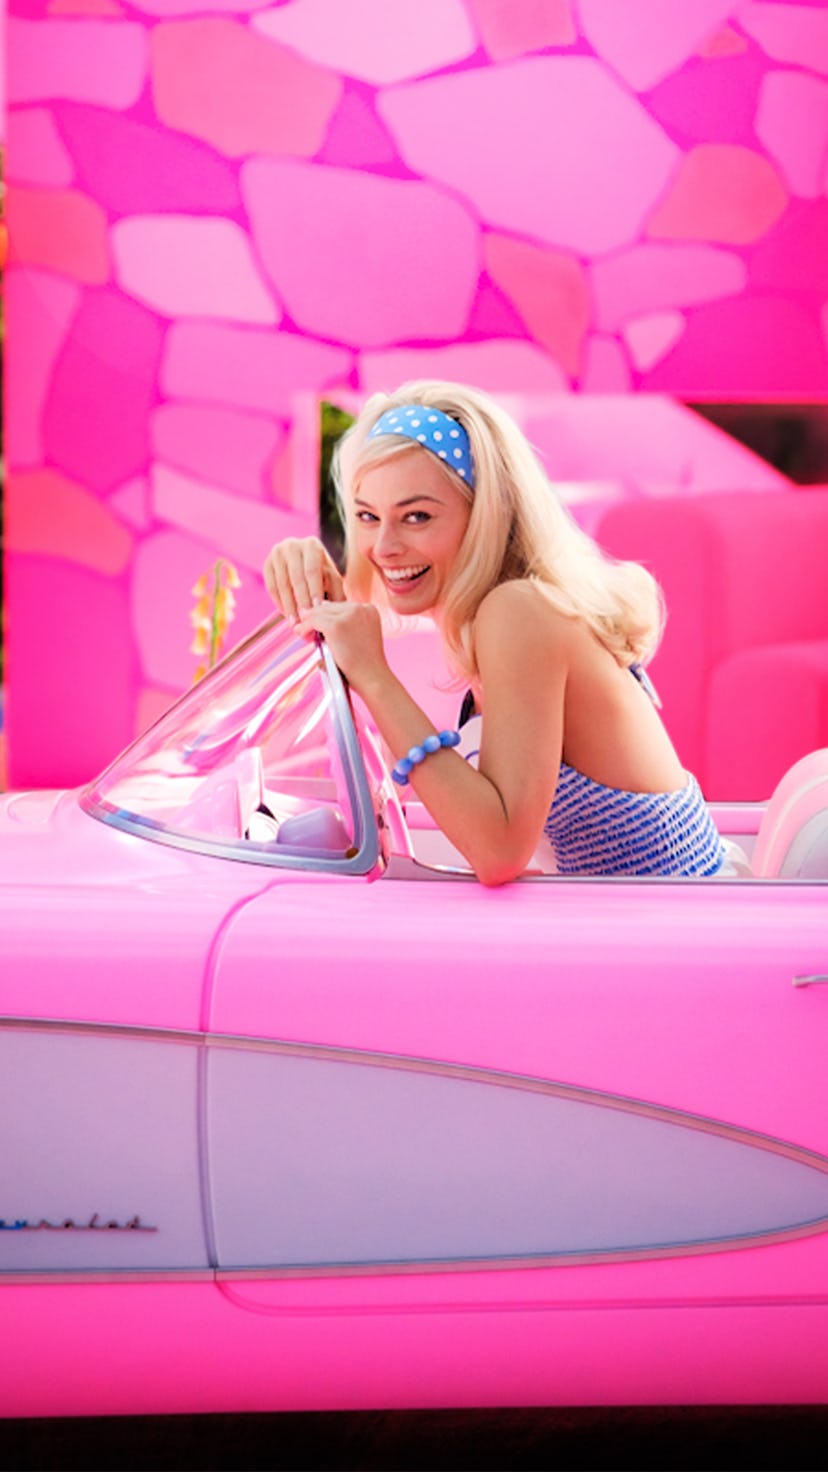 Margot Robie as Barbie in a pink convertible car.